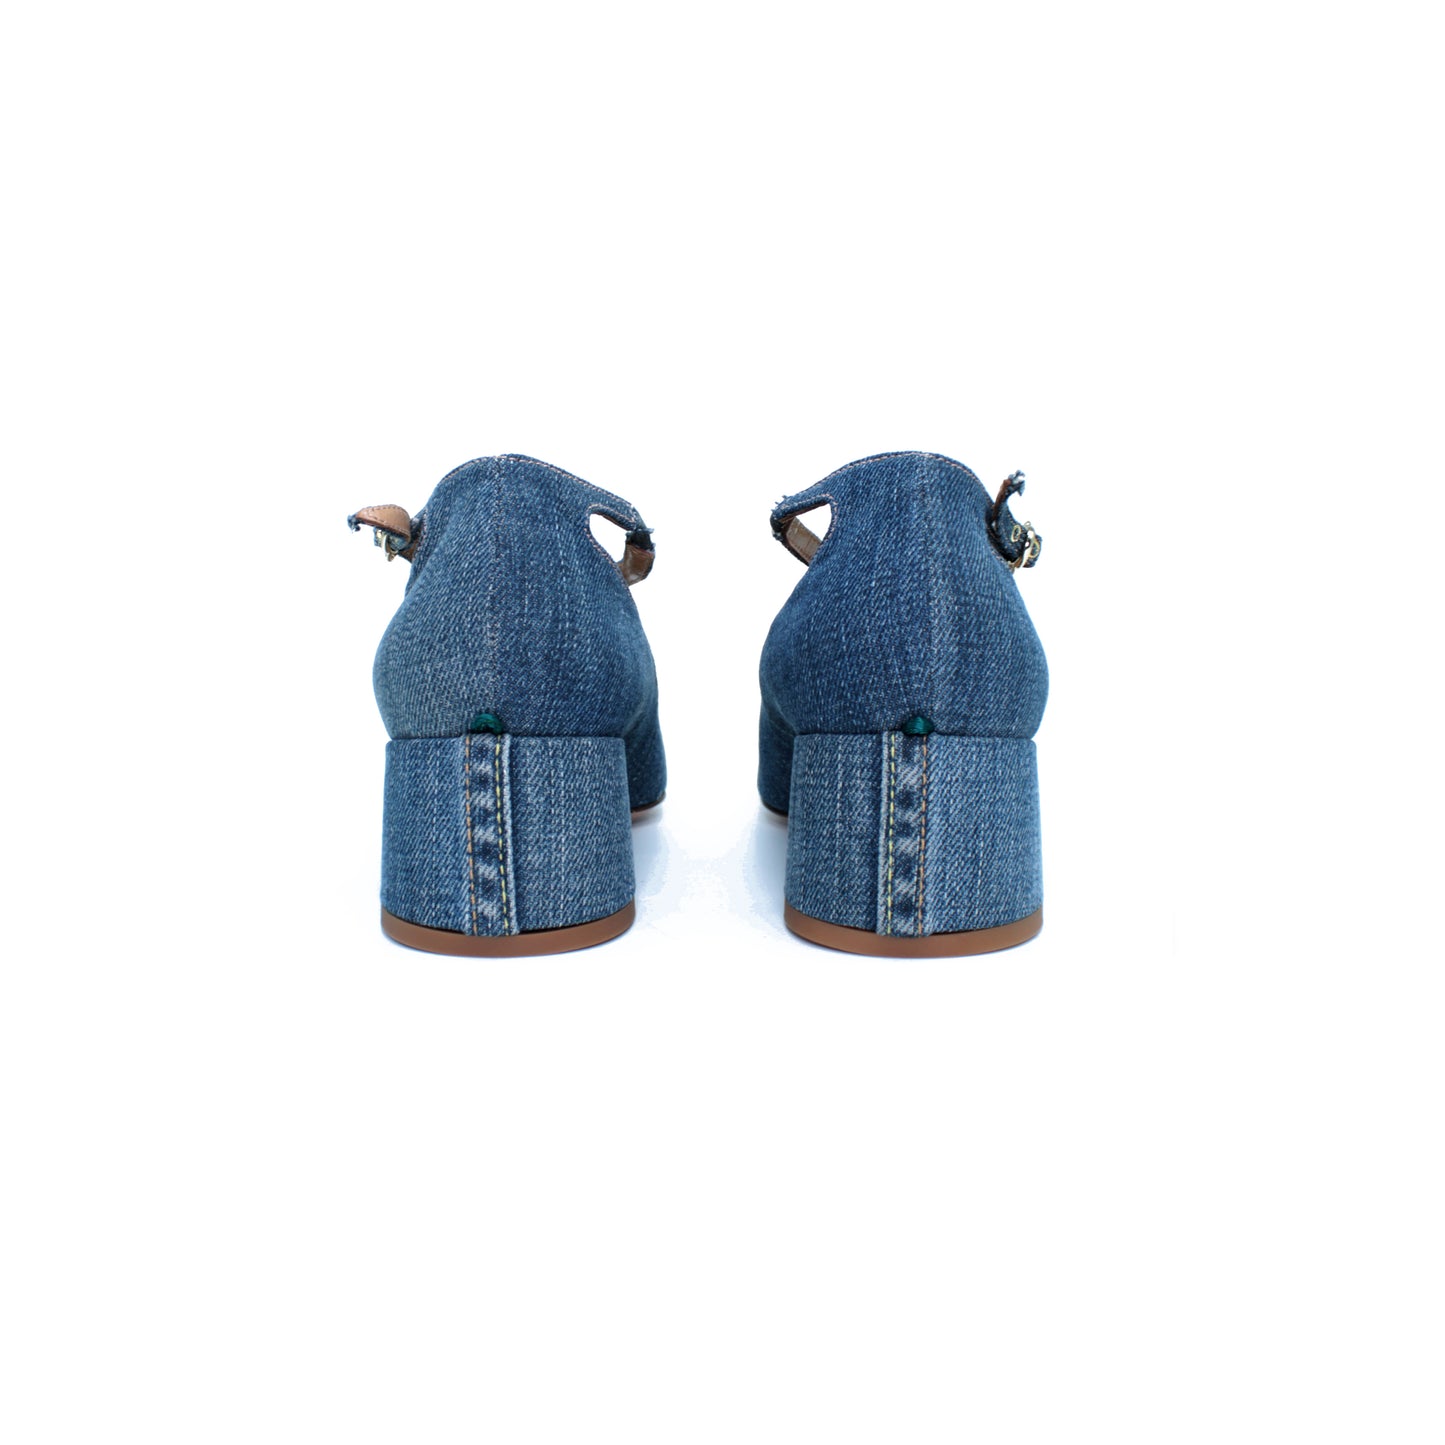 Pump Two for Love in recycled denim 03 - EXCLUSIVE ONLINE